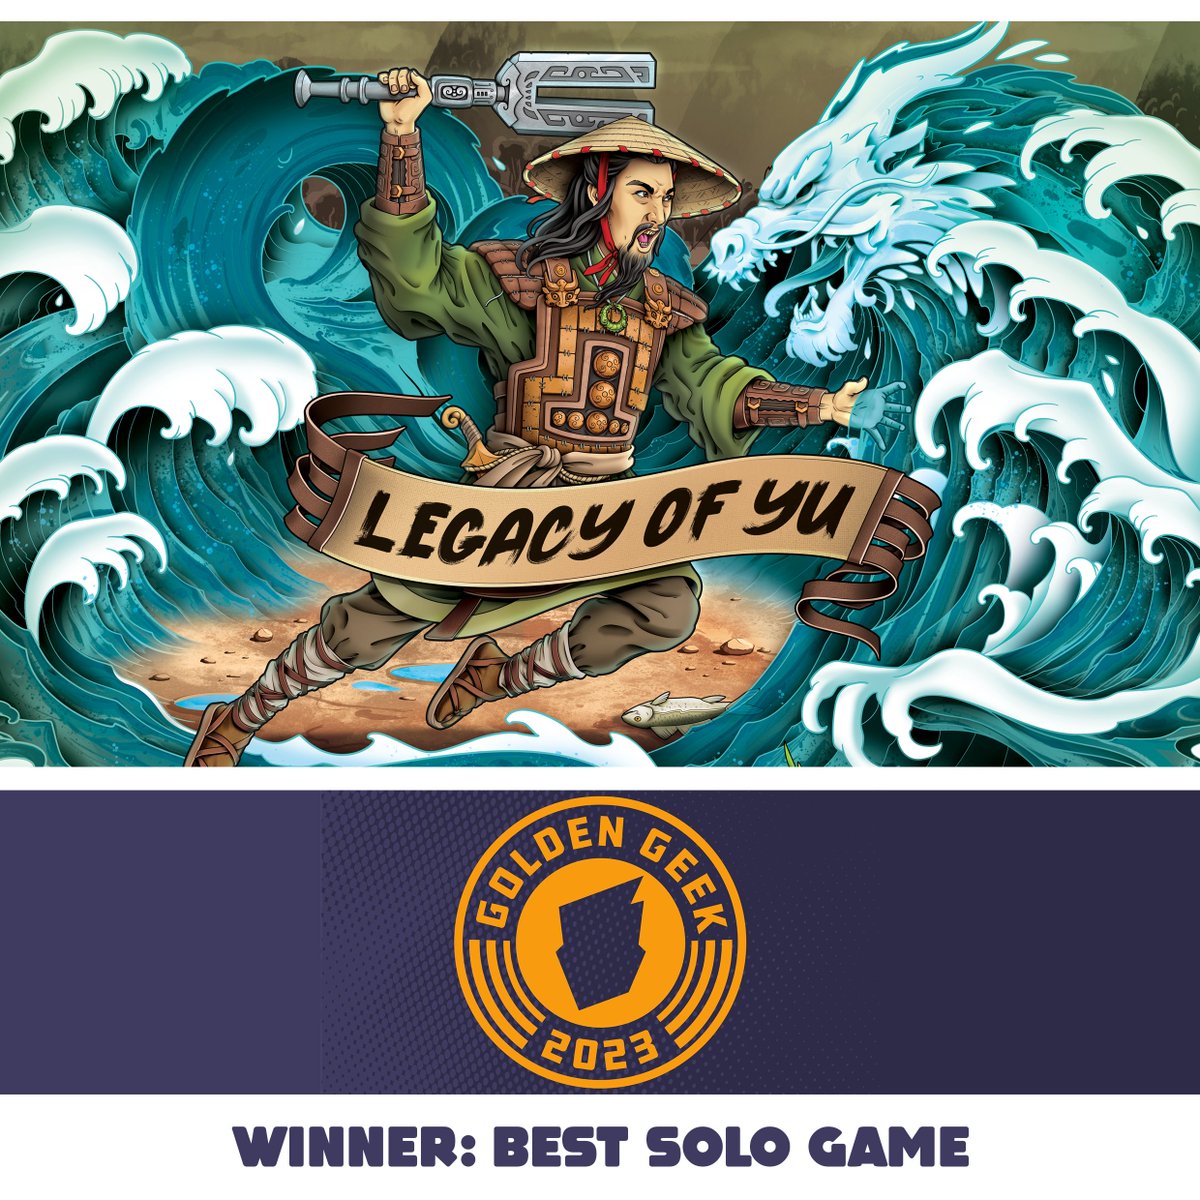 Legacy of Yu has been voted the best solo game of 2023 by BGG users. Thank you to everyone who voted! This is a great honour.